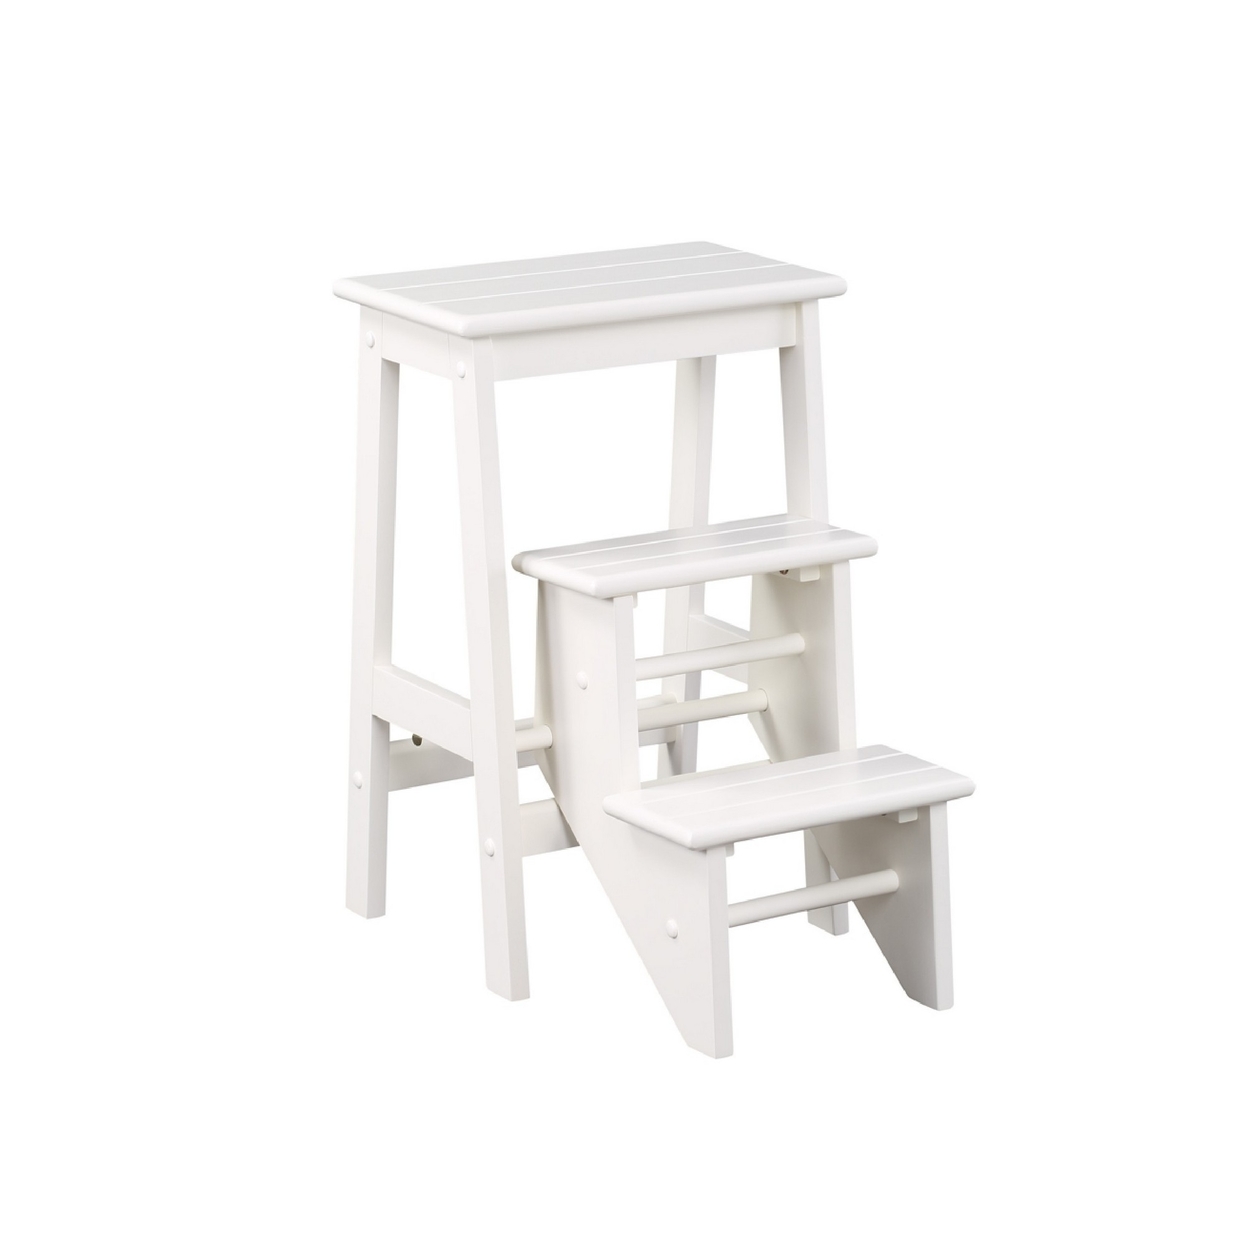 24 Inch 3 Level Step Stool, Plank Tops And Safety Latch, Classic White Wood- Saltoro Sherpi